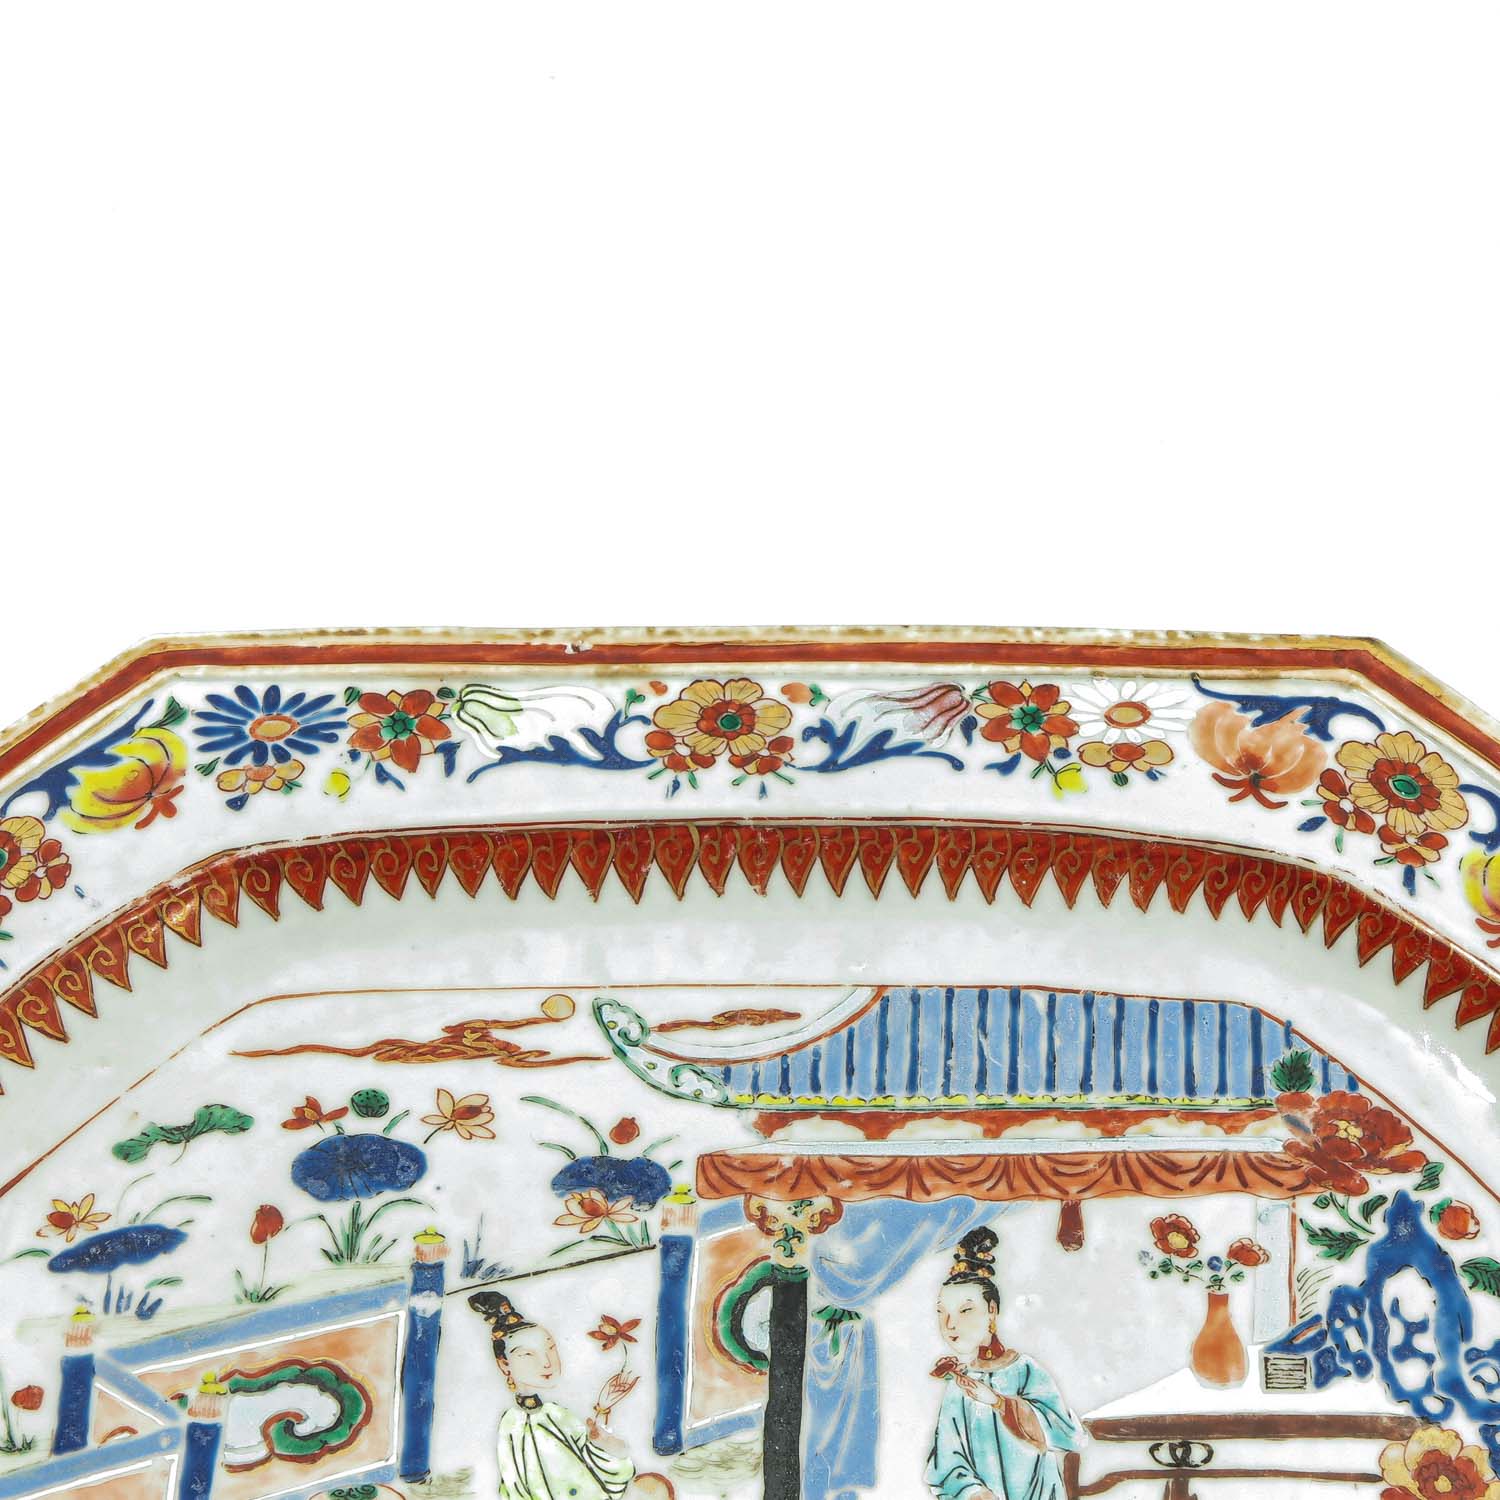 A Polychrome Decor Serving Tray - Image 3 of 7